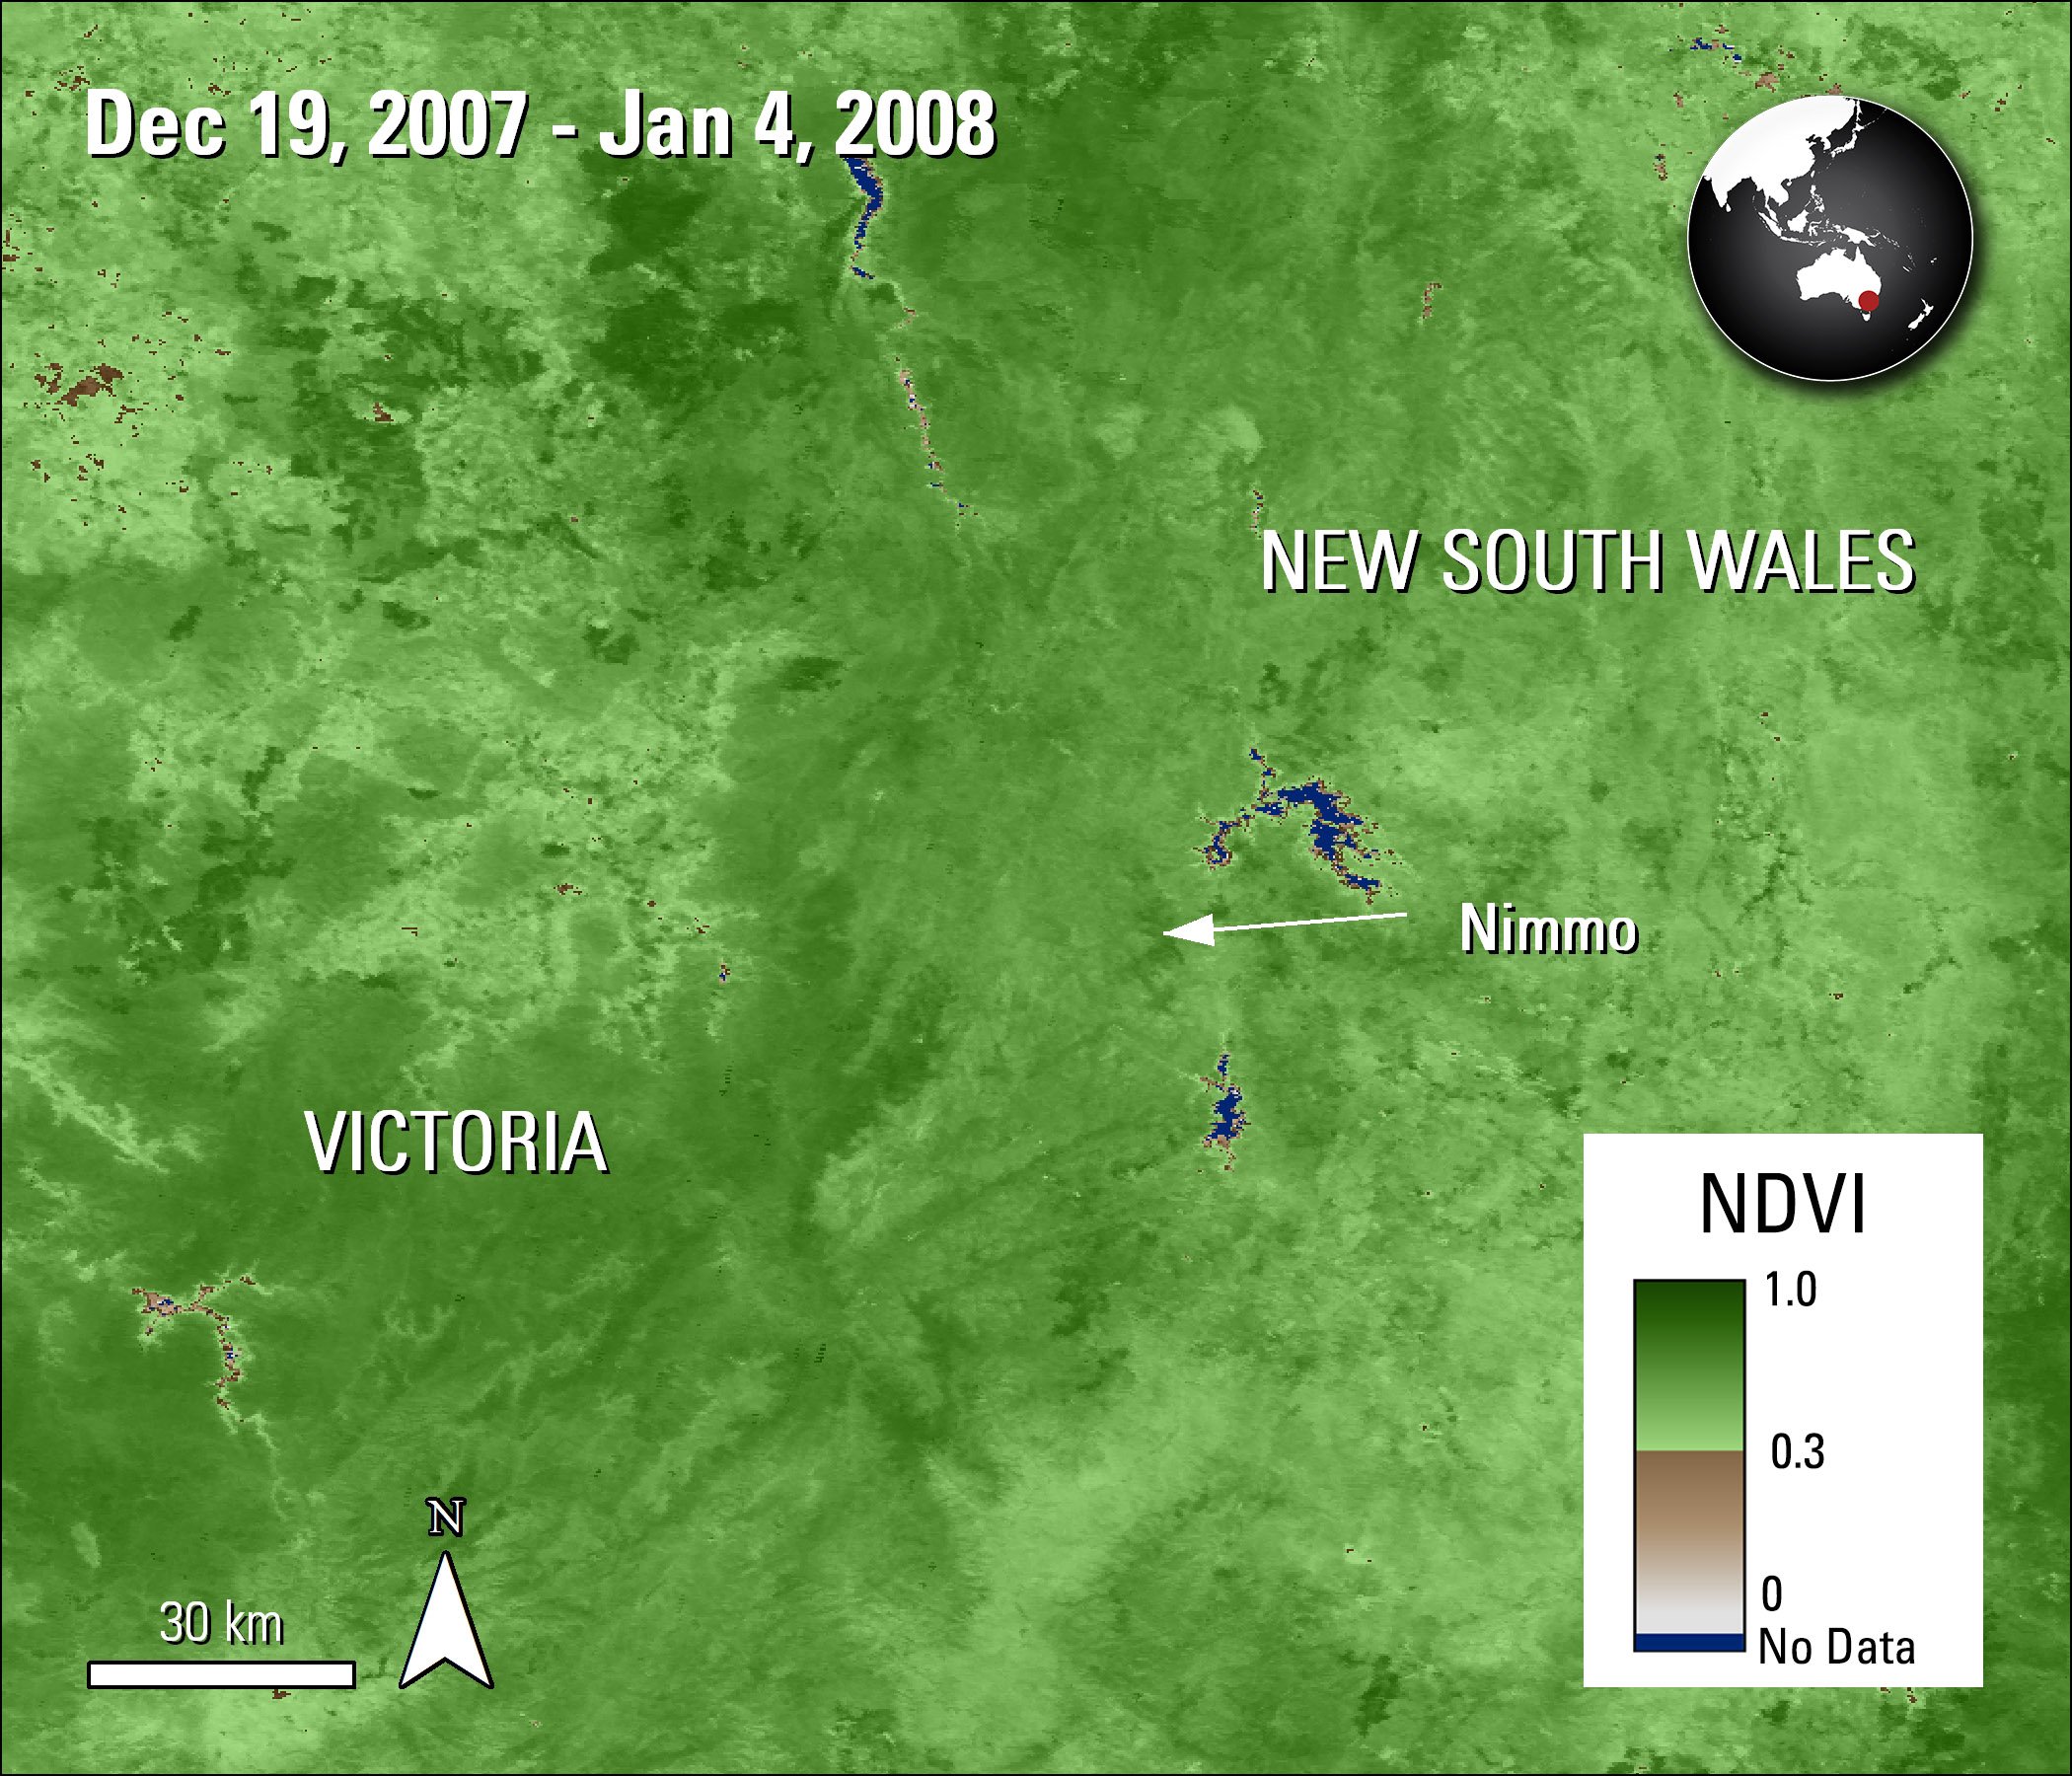 Terra MODIS NDVI data over part of Australia, acquired between December 19, 2007 and January 4, 2008.